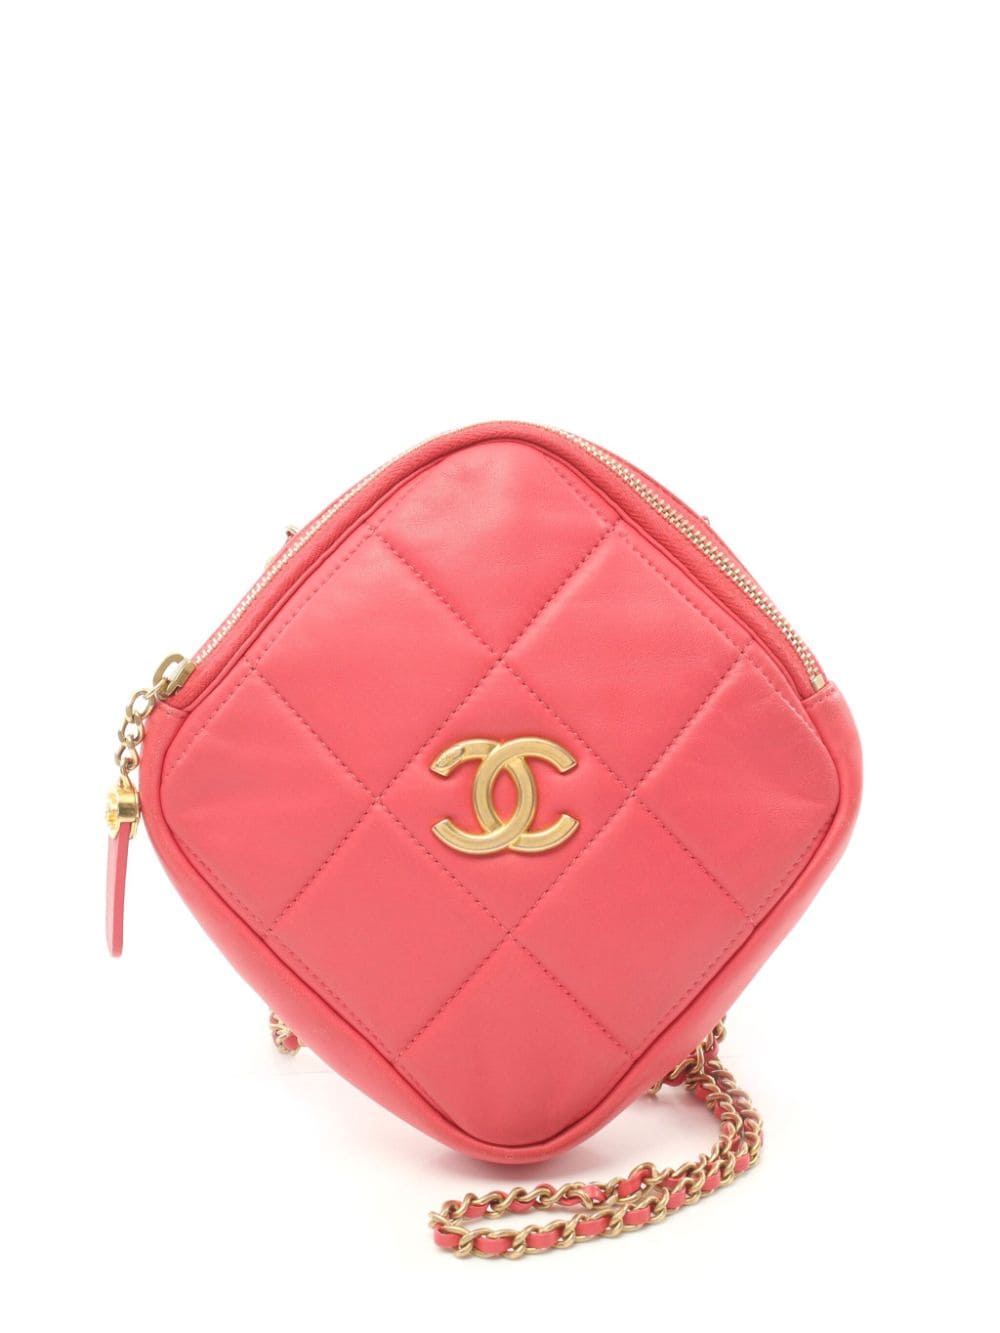 CHANEL Pre-Owned 2020-2021 CC diamond-quilted shoulder bag - Rosa